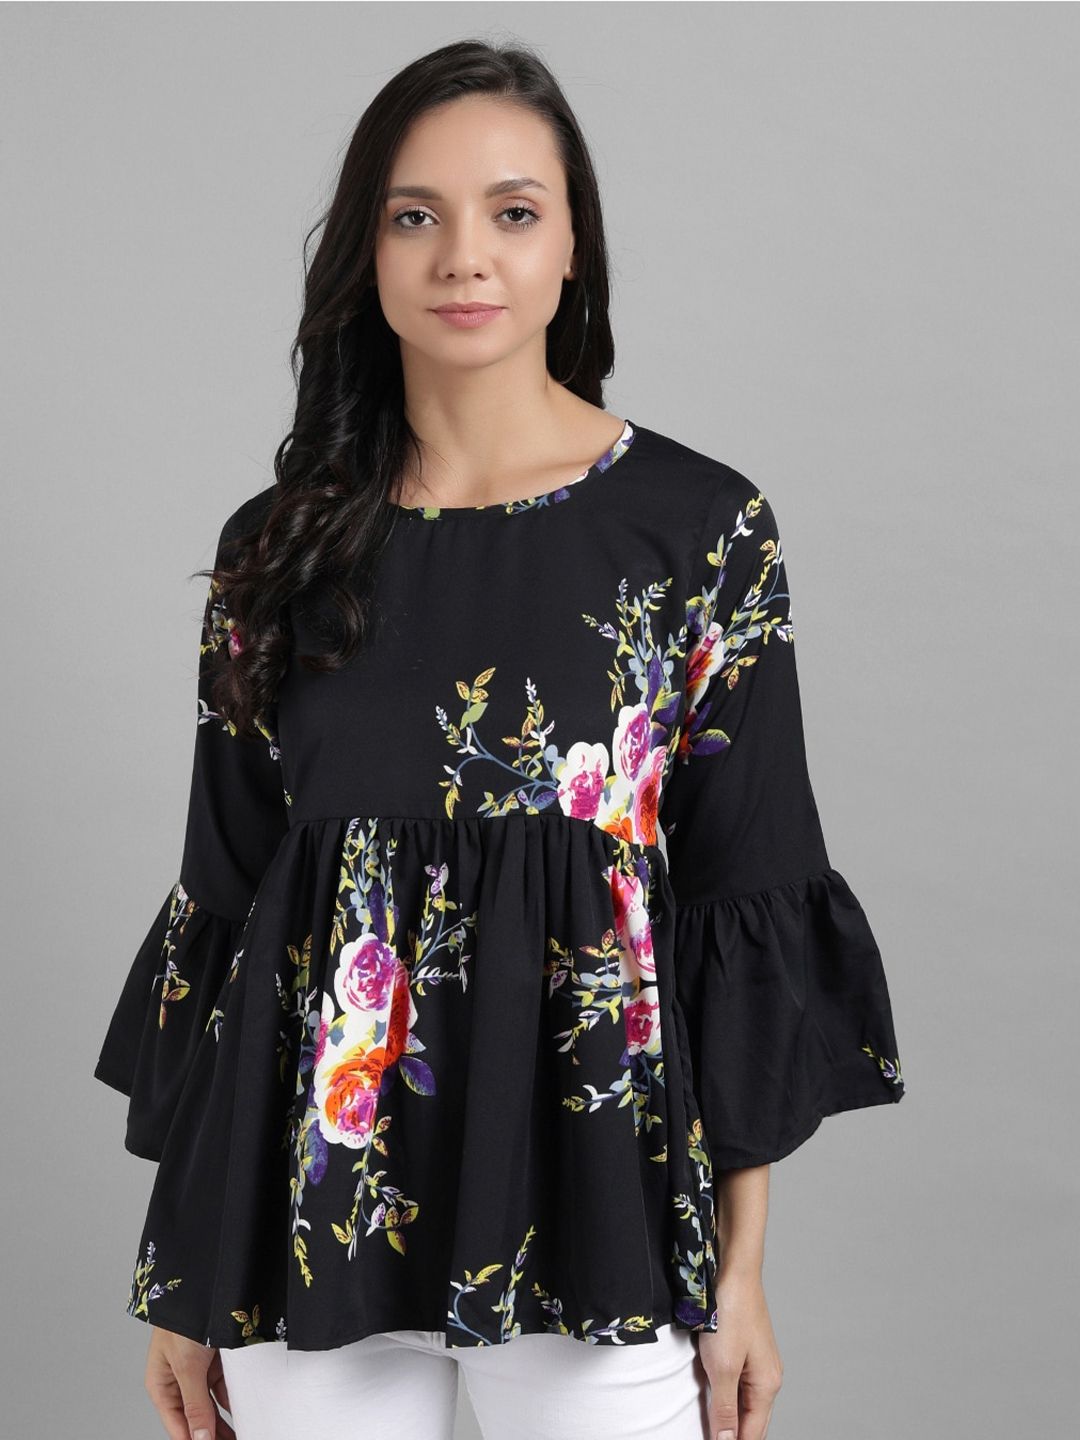 BAESD Floral Printed Bell Sleeves Pure Cotton Peplum Top Price in India